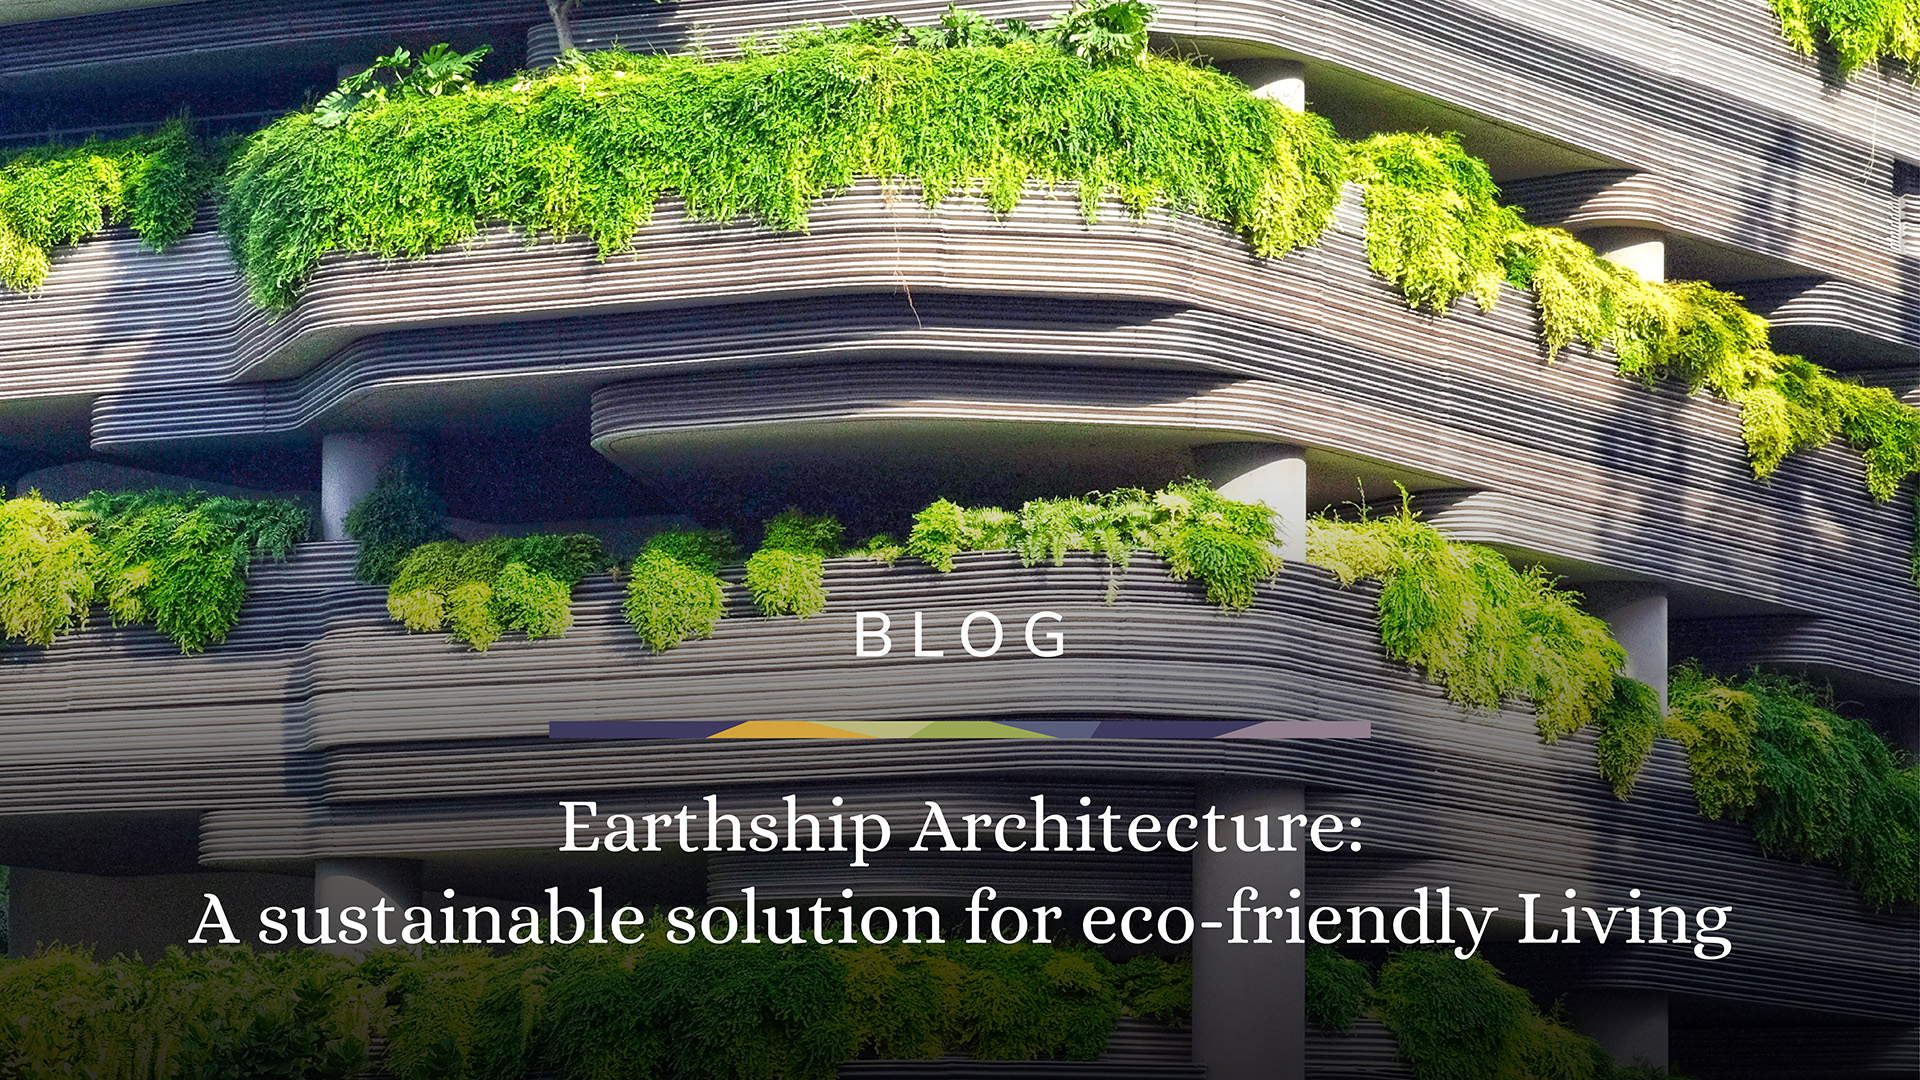 Earthship Architecture: A sustainable solution for eco-friendly living